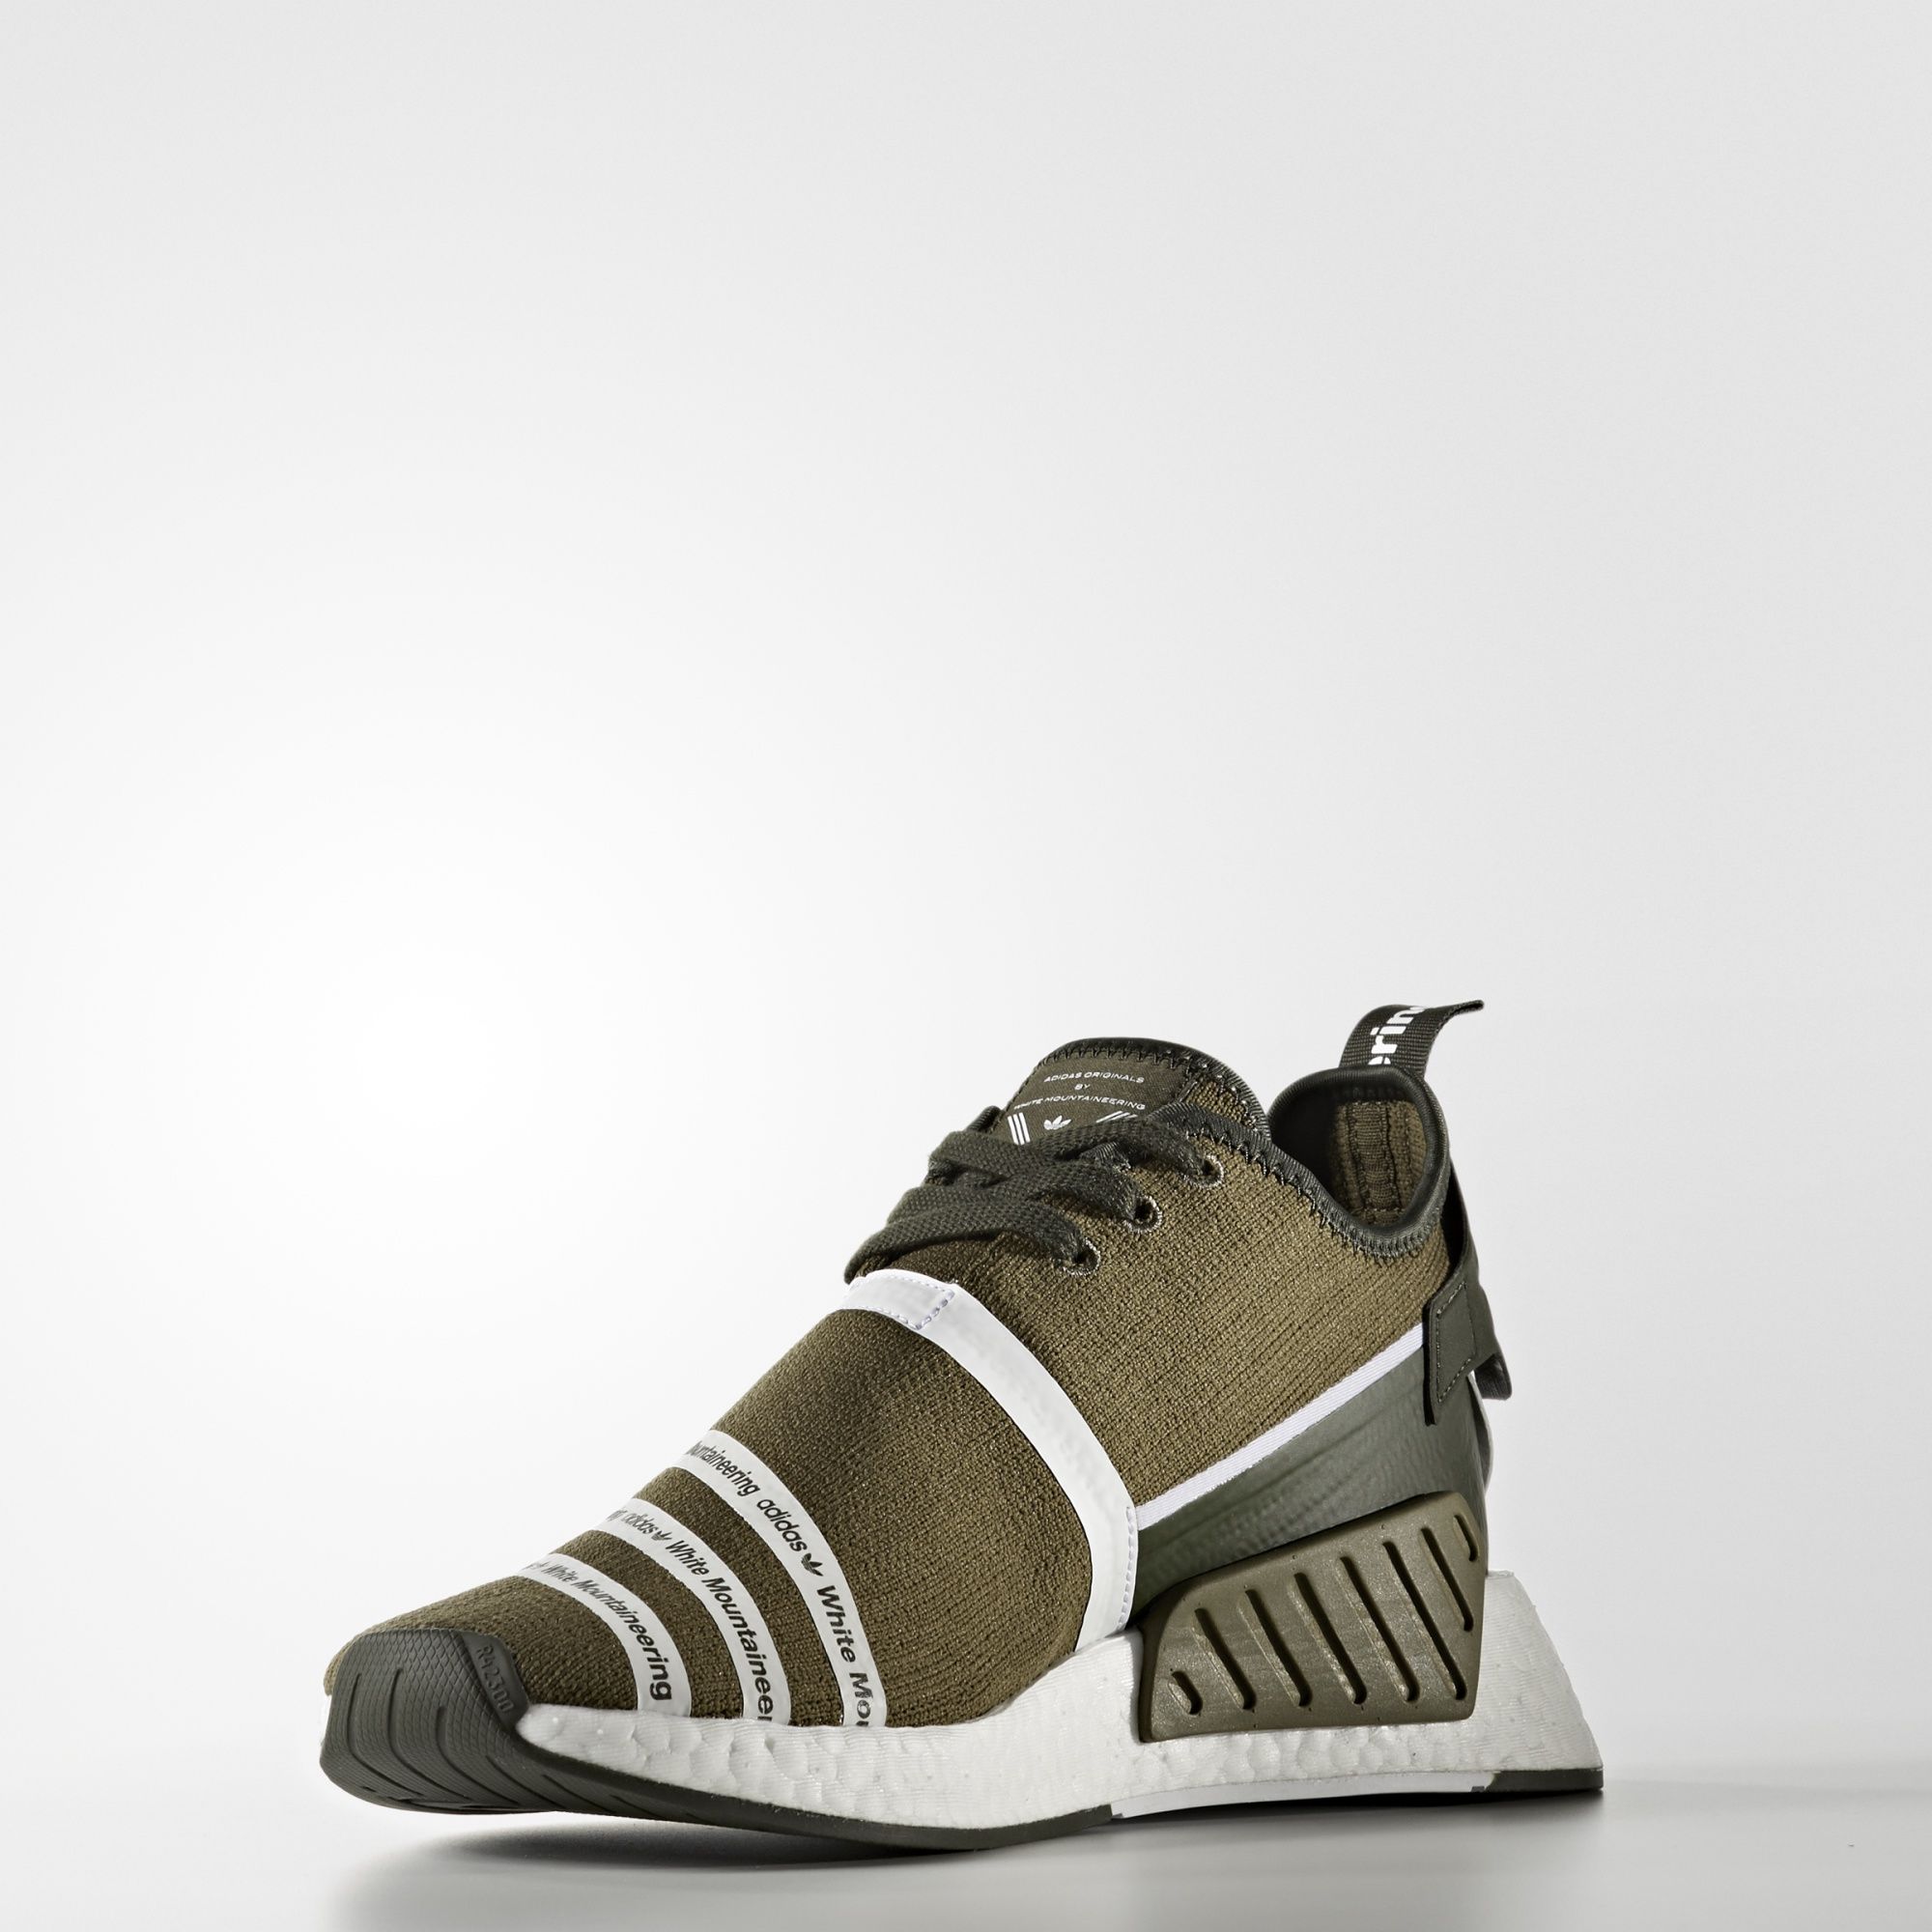 Adidas x White Mountaineering
NMD_R2 Primeknit
Trace Olive / Footwear White